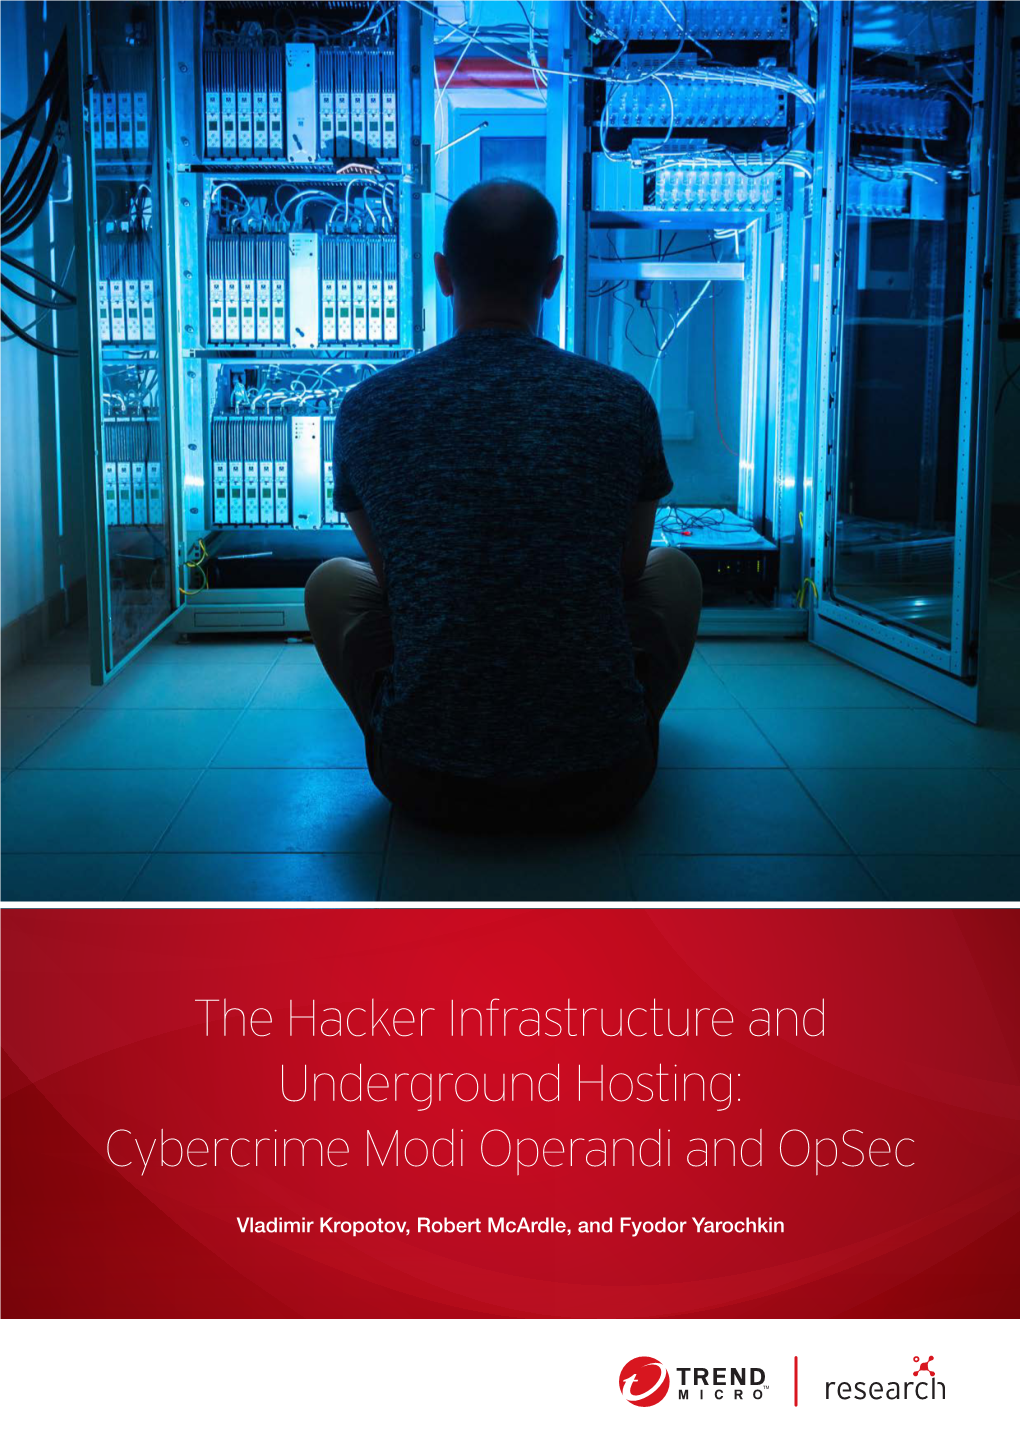 The Hacker Infrastructure and Underground Hosting: Cybercrime Modi Operandi and Opsec